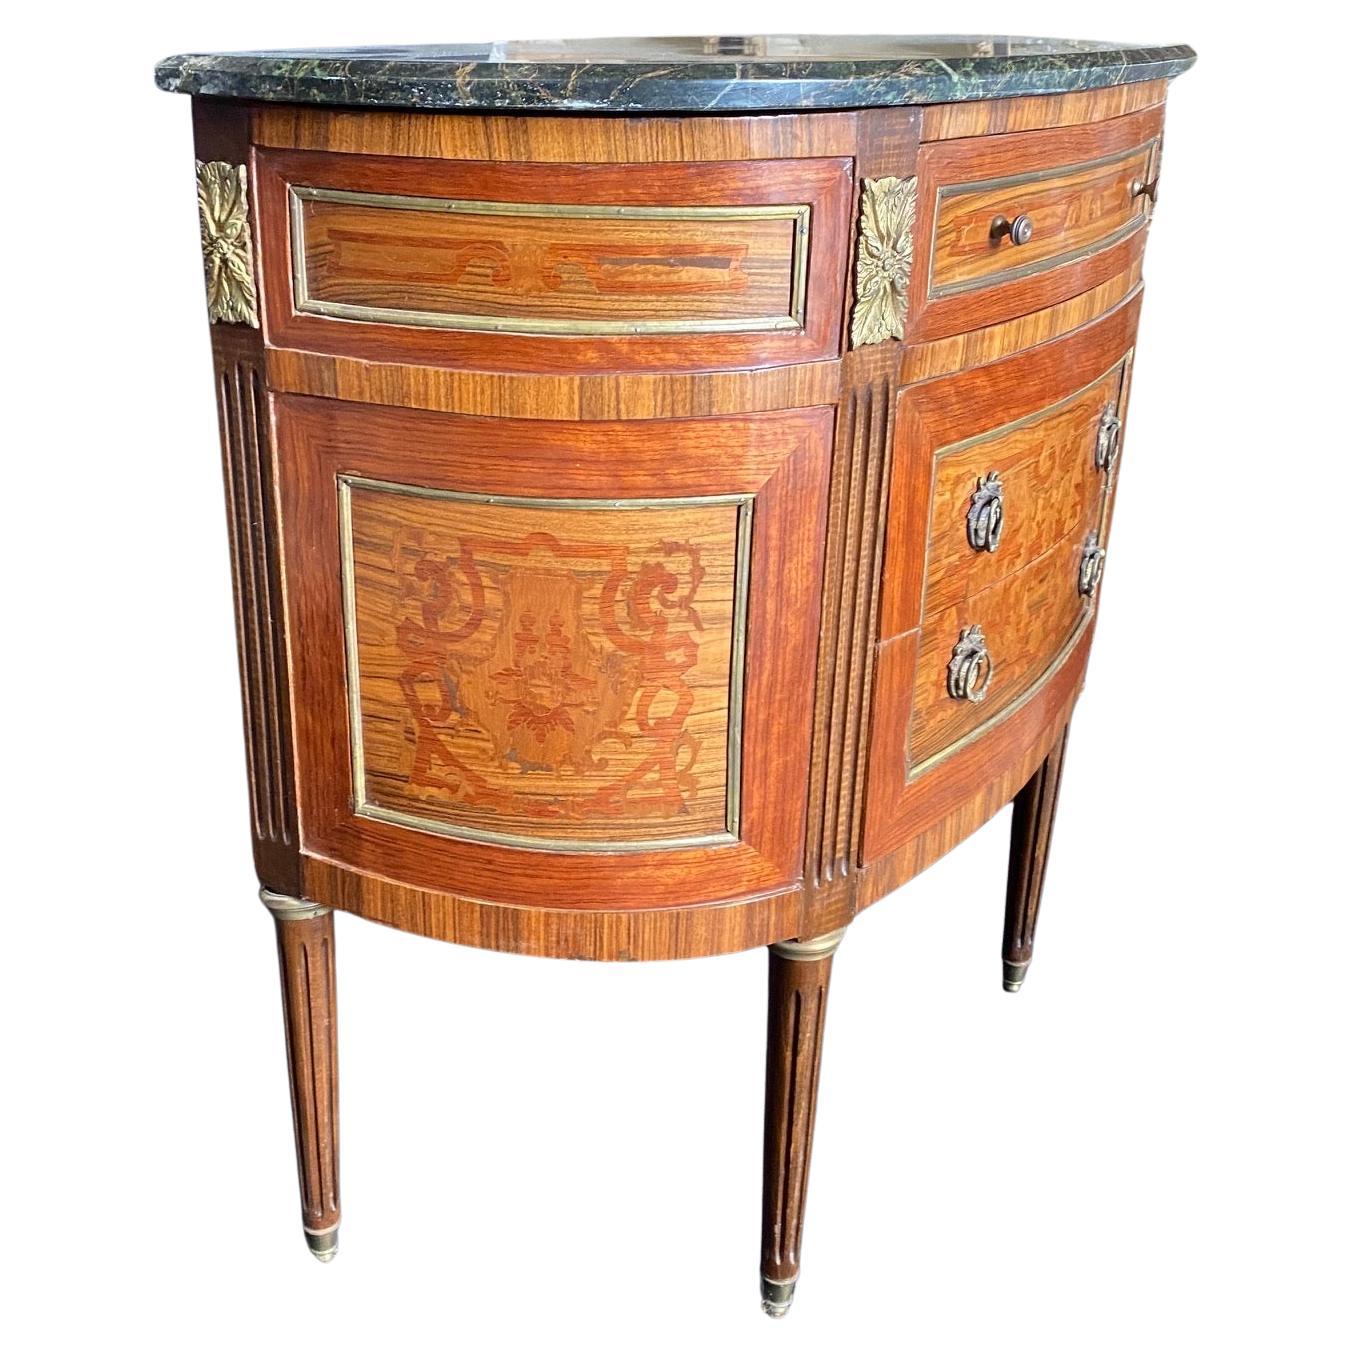 Elegant French Louis XVI demilune marble top commode or console is a remarkable work of art: it features a fully curved casework in a demilune form that presents no corners or sharp edges into the room at all. Hand-crafted from walnut and inlaid